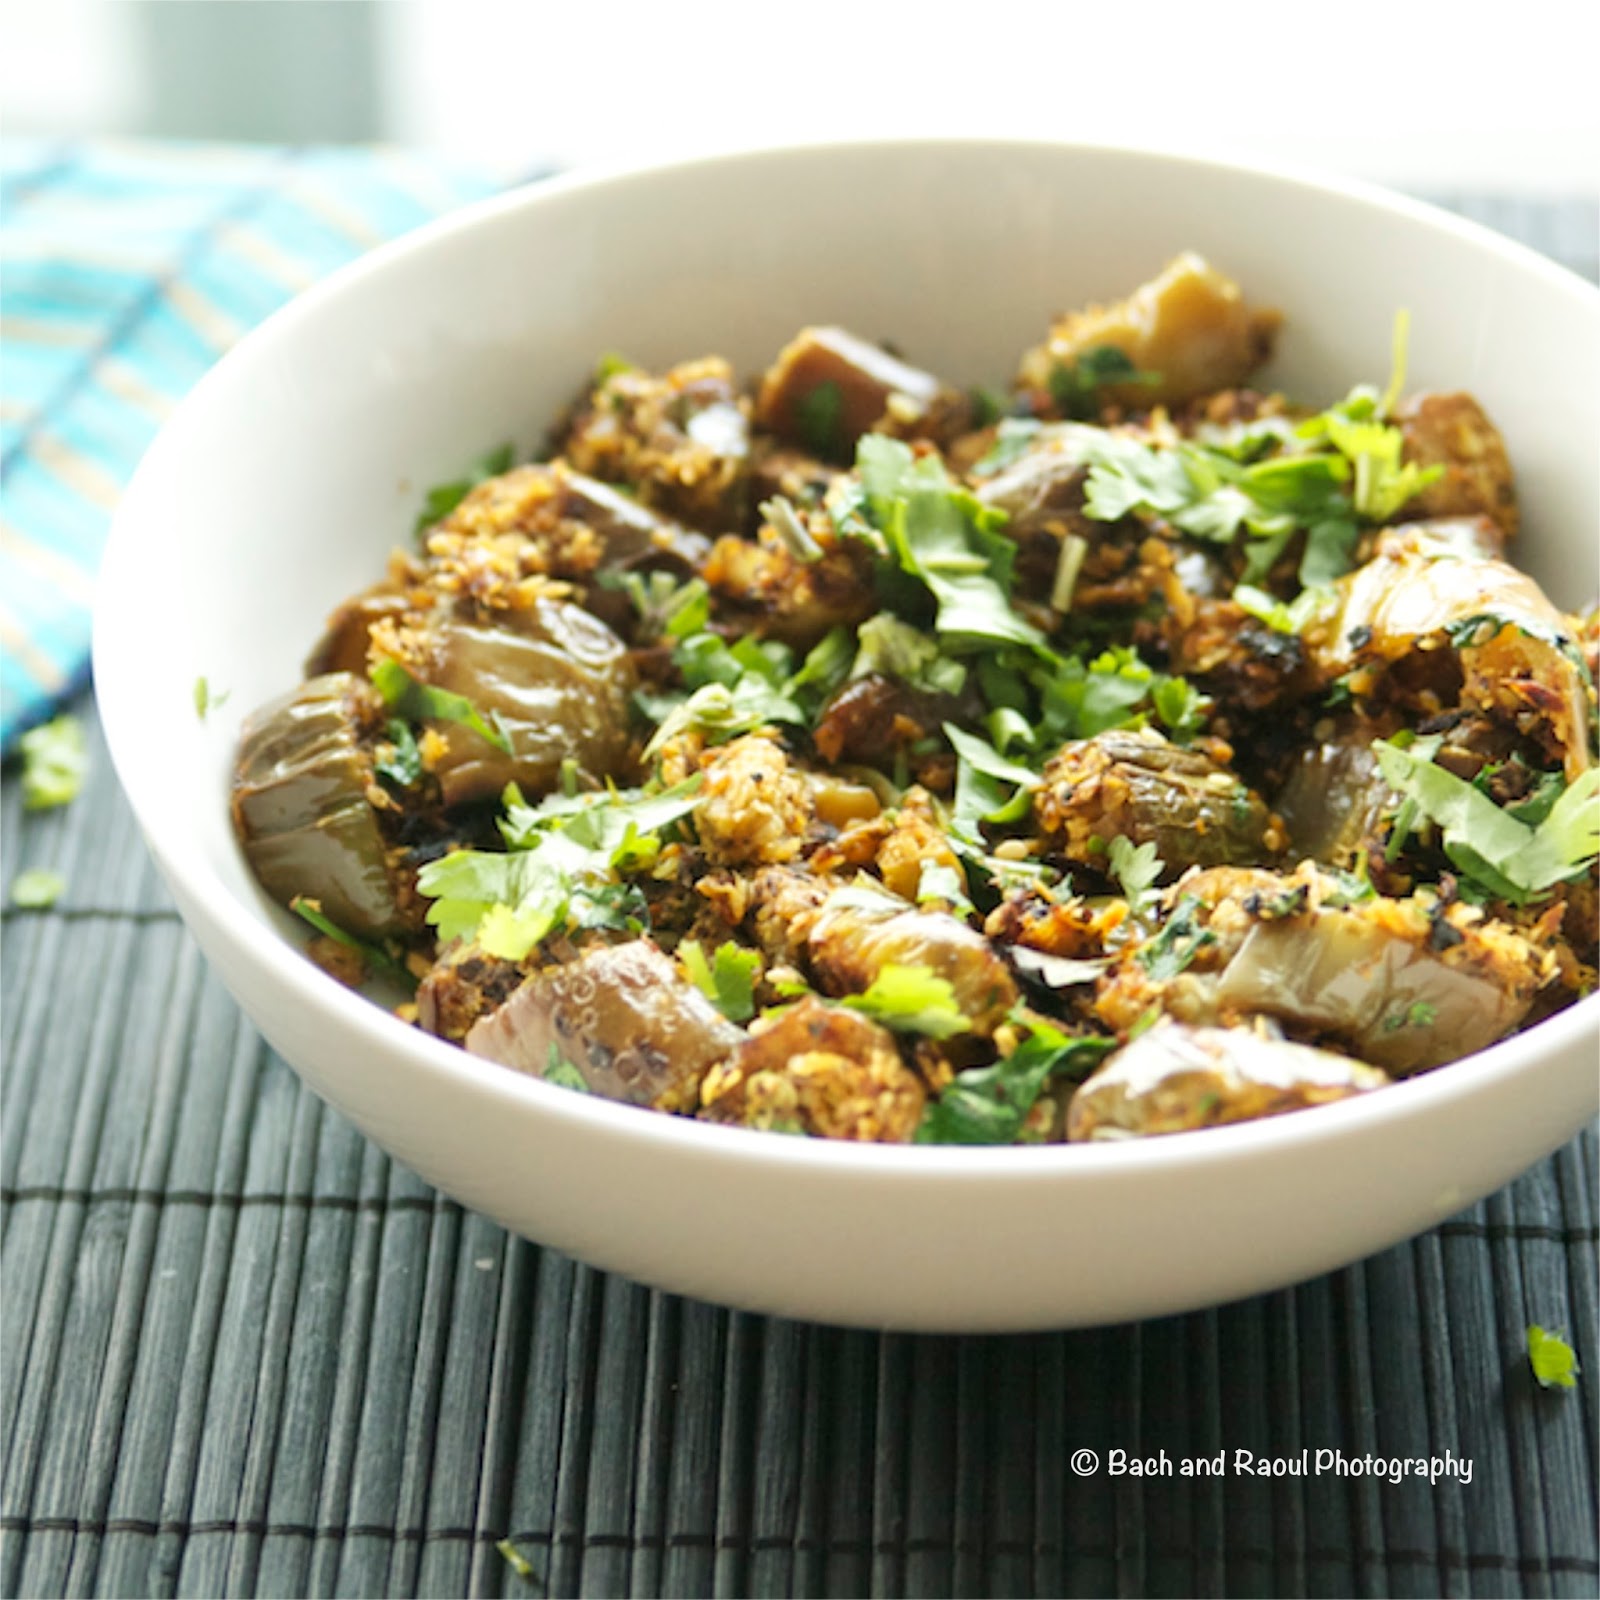 Bharli Vangi - Vegan Indian Eggplant Cooked with nuts and spices